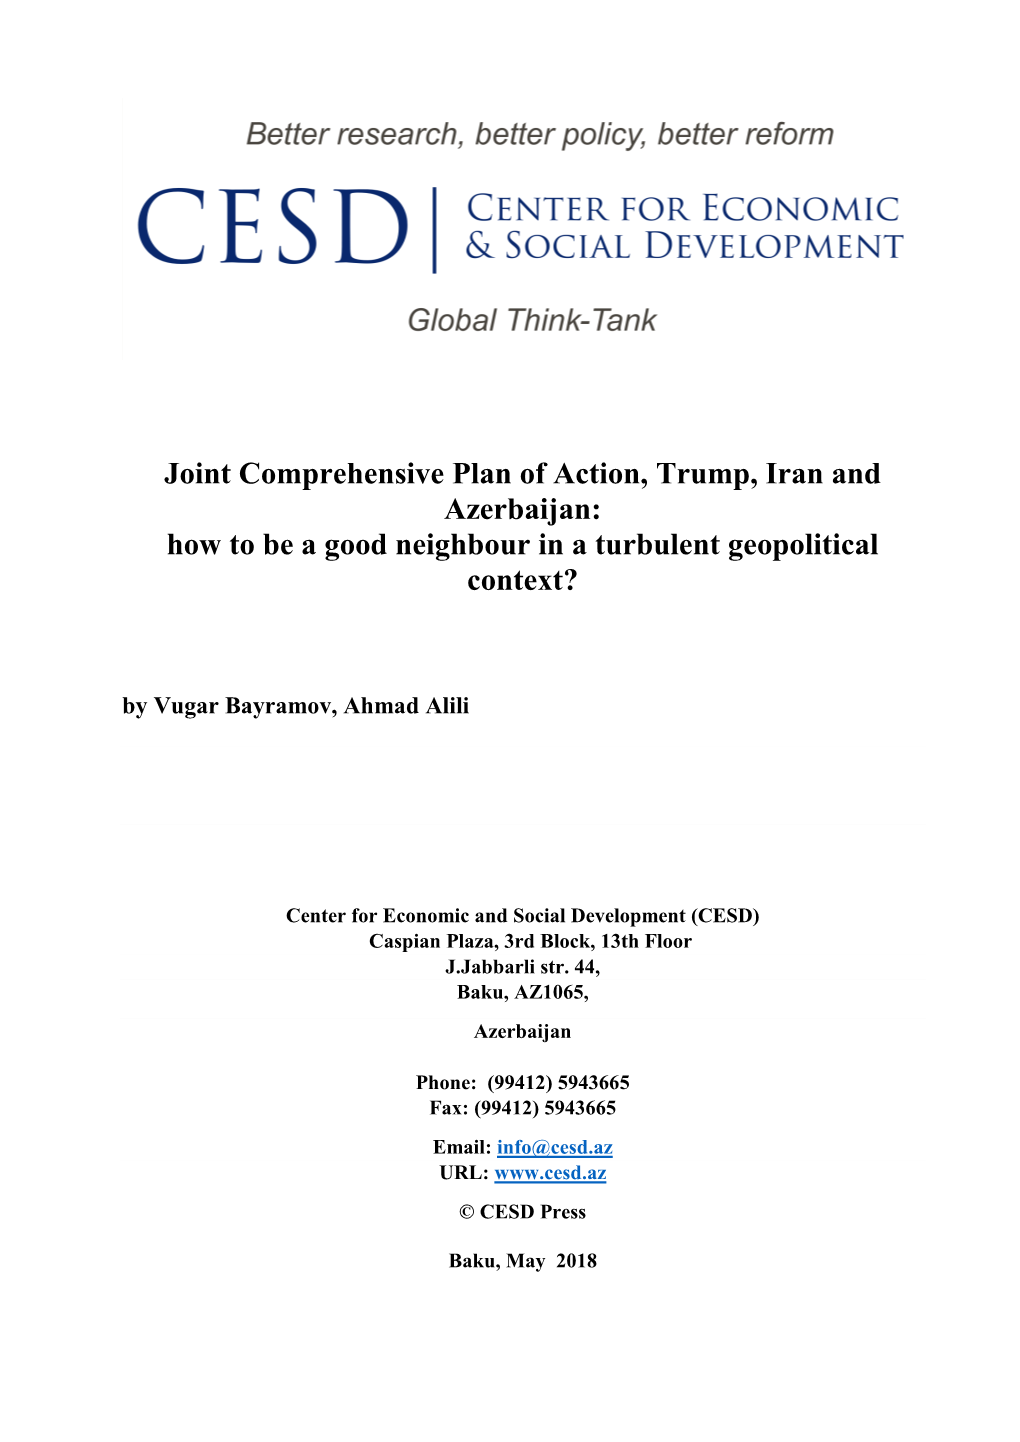 Joint Comprehensive Plan of Action, Trump, Iran and Azerbaijan: How to Be a Good Neighbour in a Turbulent Geopolitical Context?